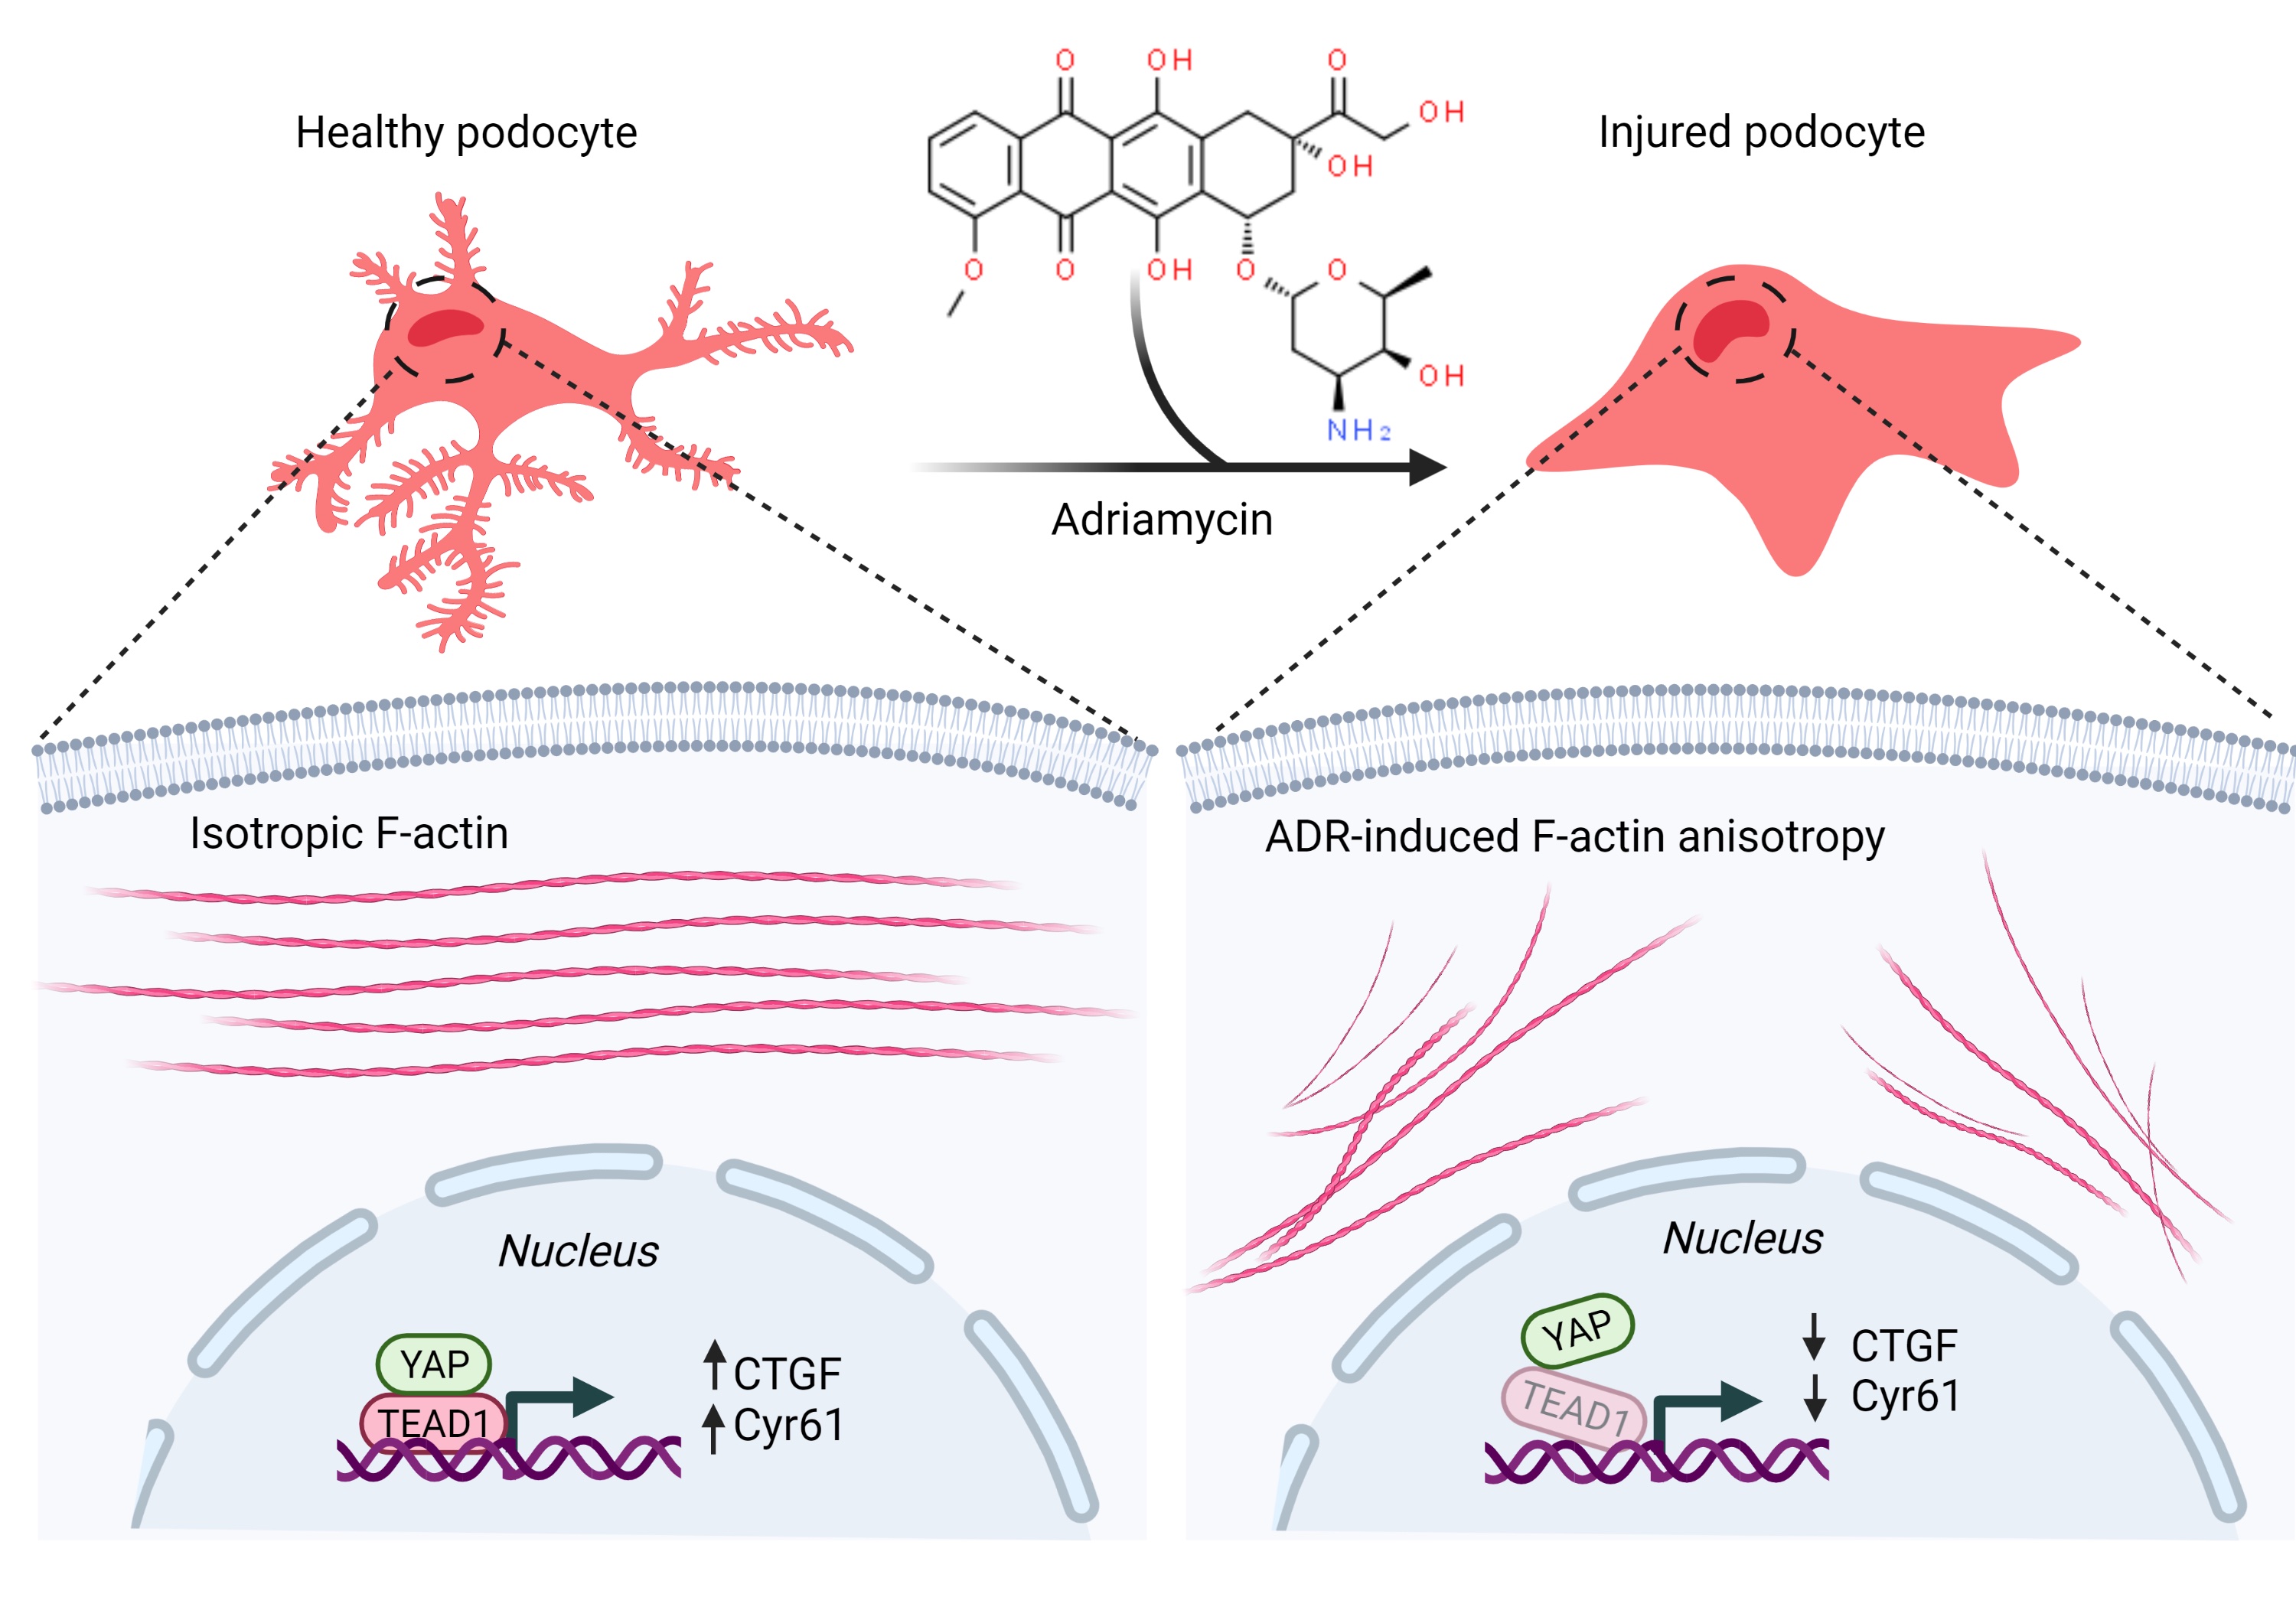 The graphic shows how the use of adriamycin caused the podocytes to become injured and collapse